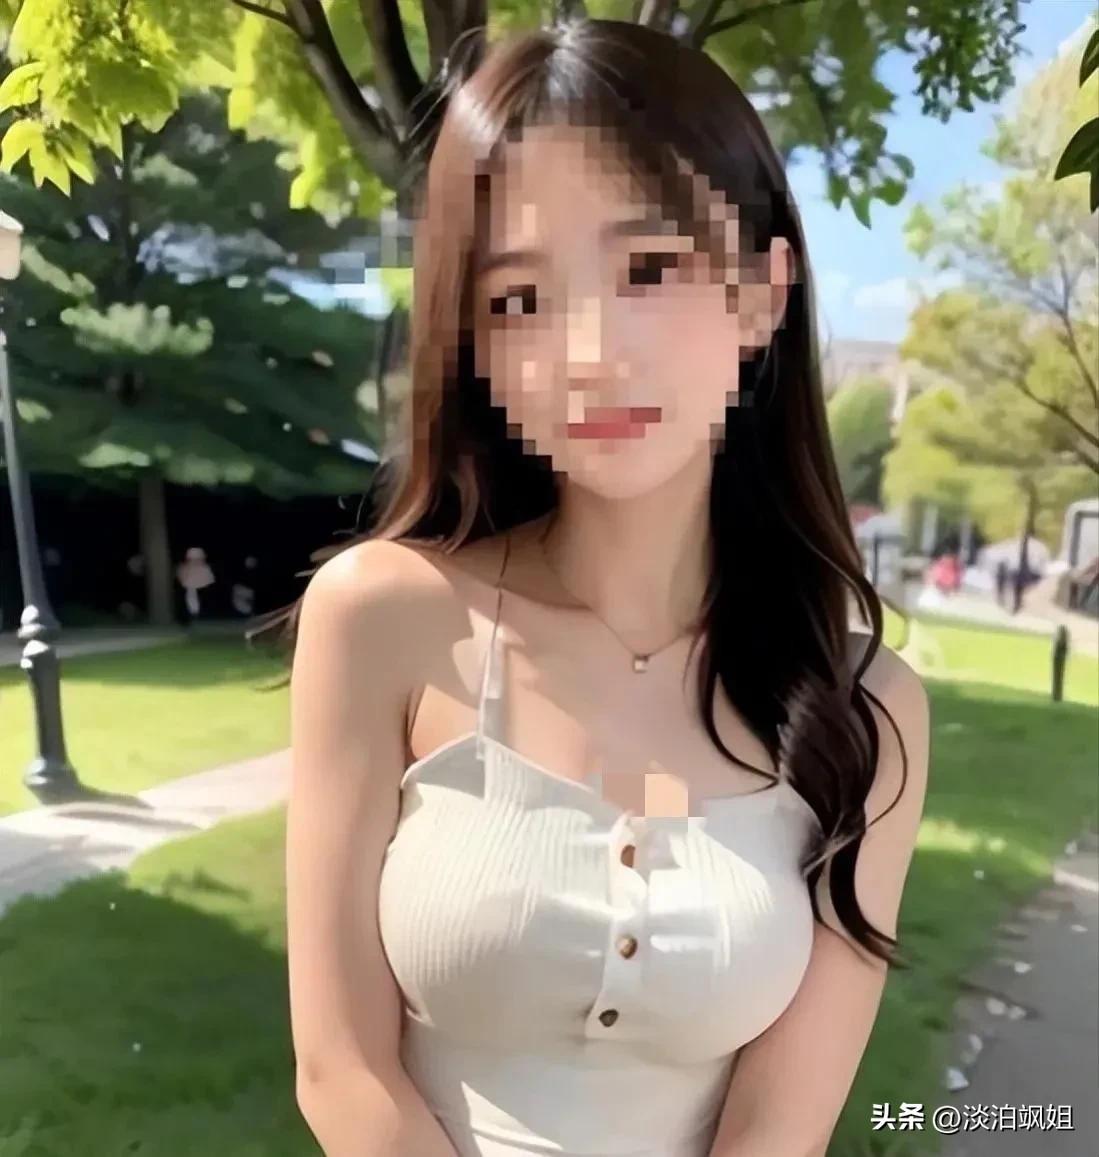 A 1V5, 40-minute indecent recording of a girl from a university in Zhejiang was exposed, and the content ruined all three views